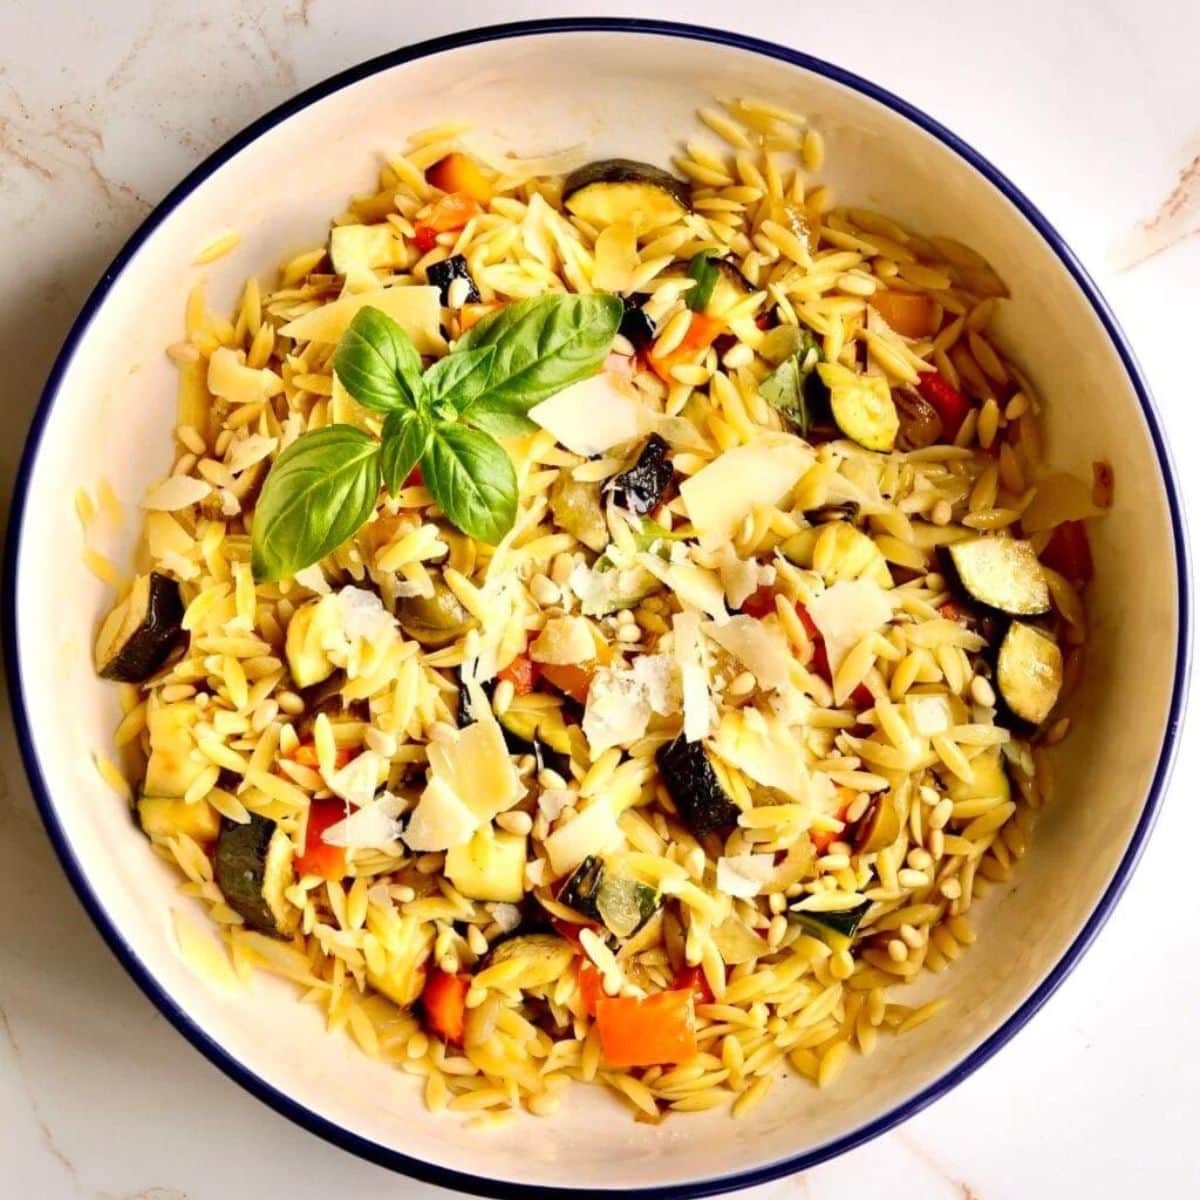 Orzo pasta salad in a bowl with basil